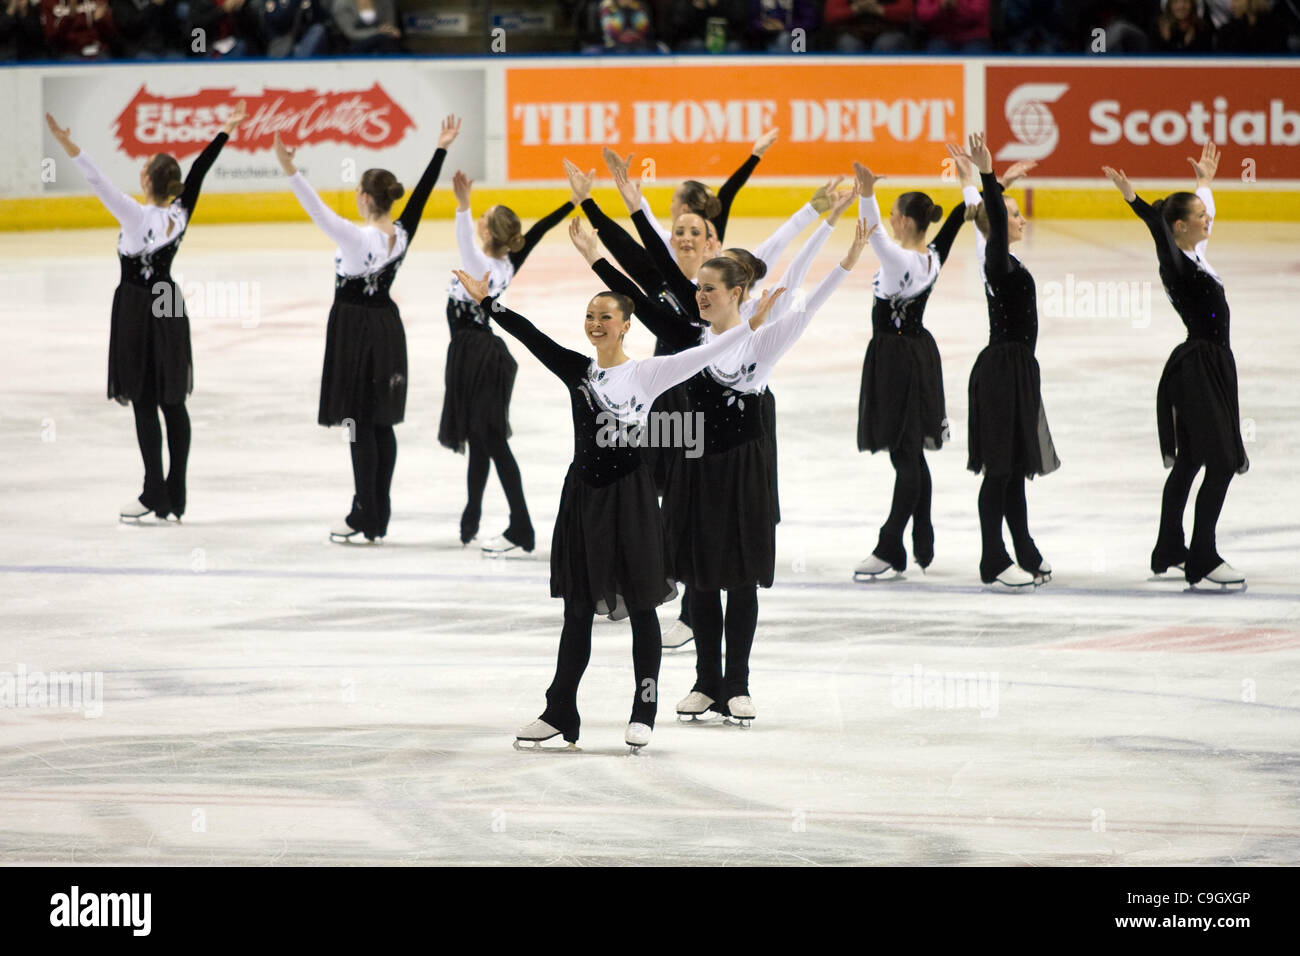 London Ontario, Canada - December 29, 2011. Members of the Canadian synchronized skating team 'Fusion' perform during the free skate component at the 2011 London Synchrofest International - Synchro In The City. The team finished in eighth place at the two day event. Stock Photo